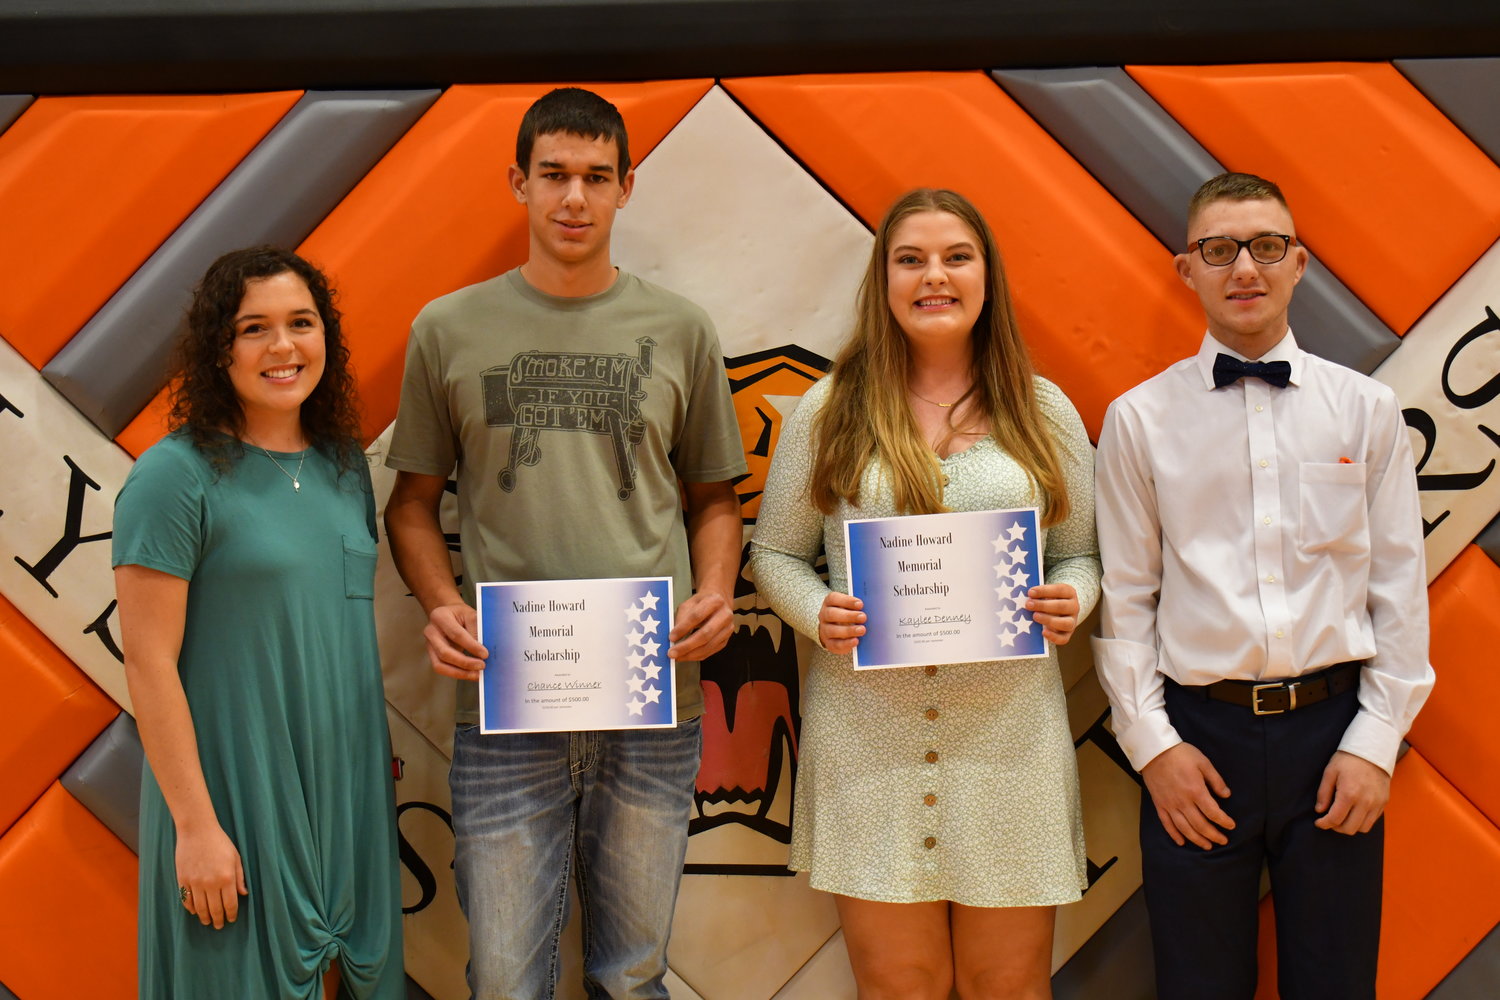 Senior Awards — Chance Winner and Kaylee Denney were given the Nadine Howard by Jordan Dawson and Justin Howard on Friday, May 13, 2022.